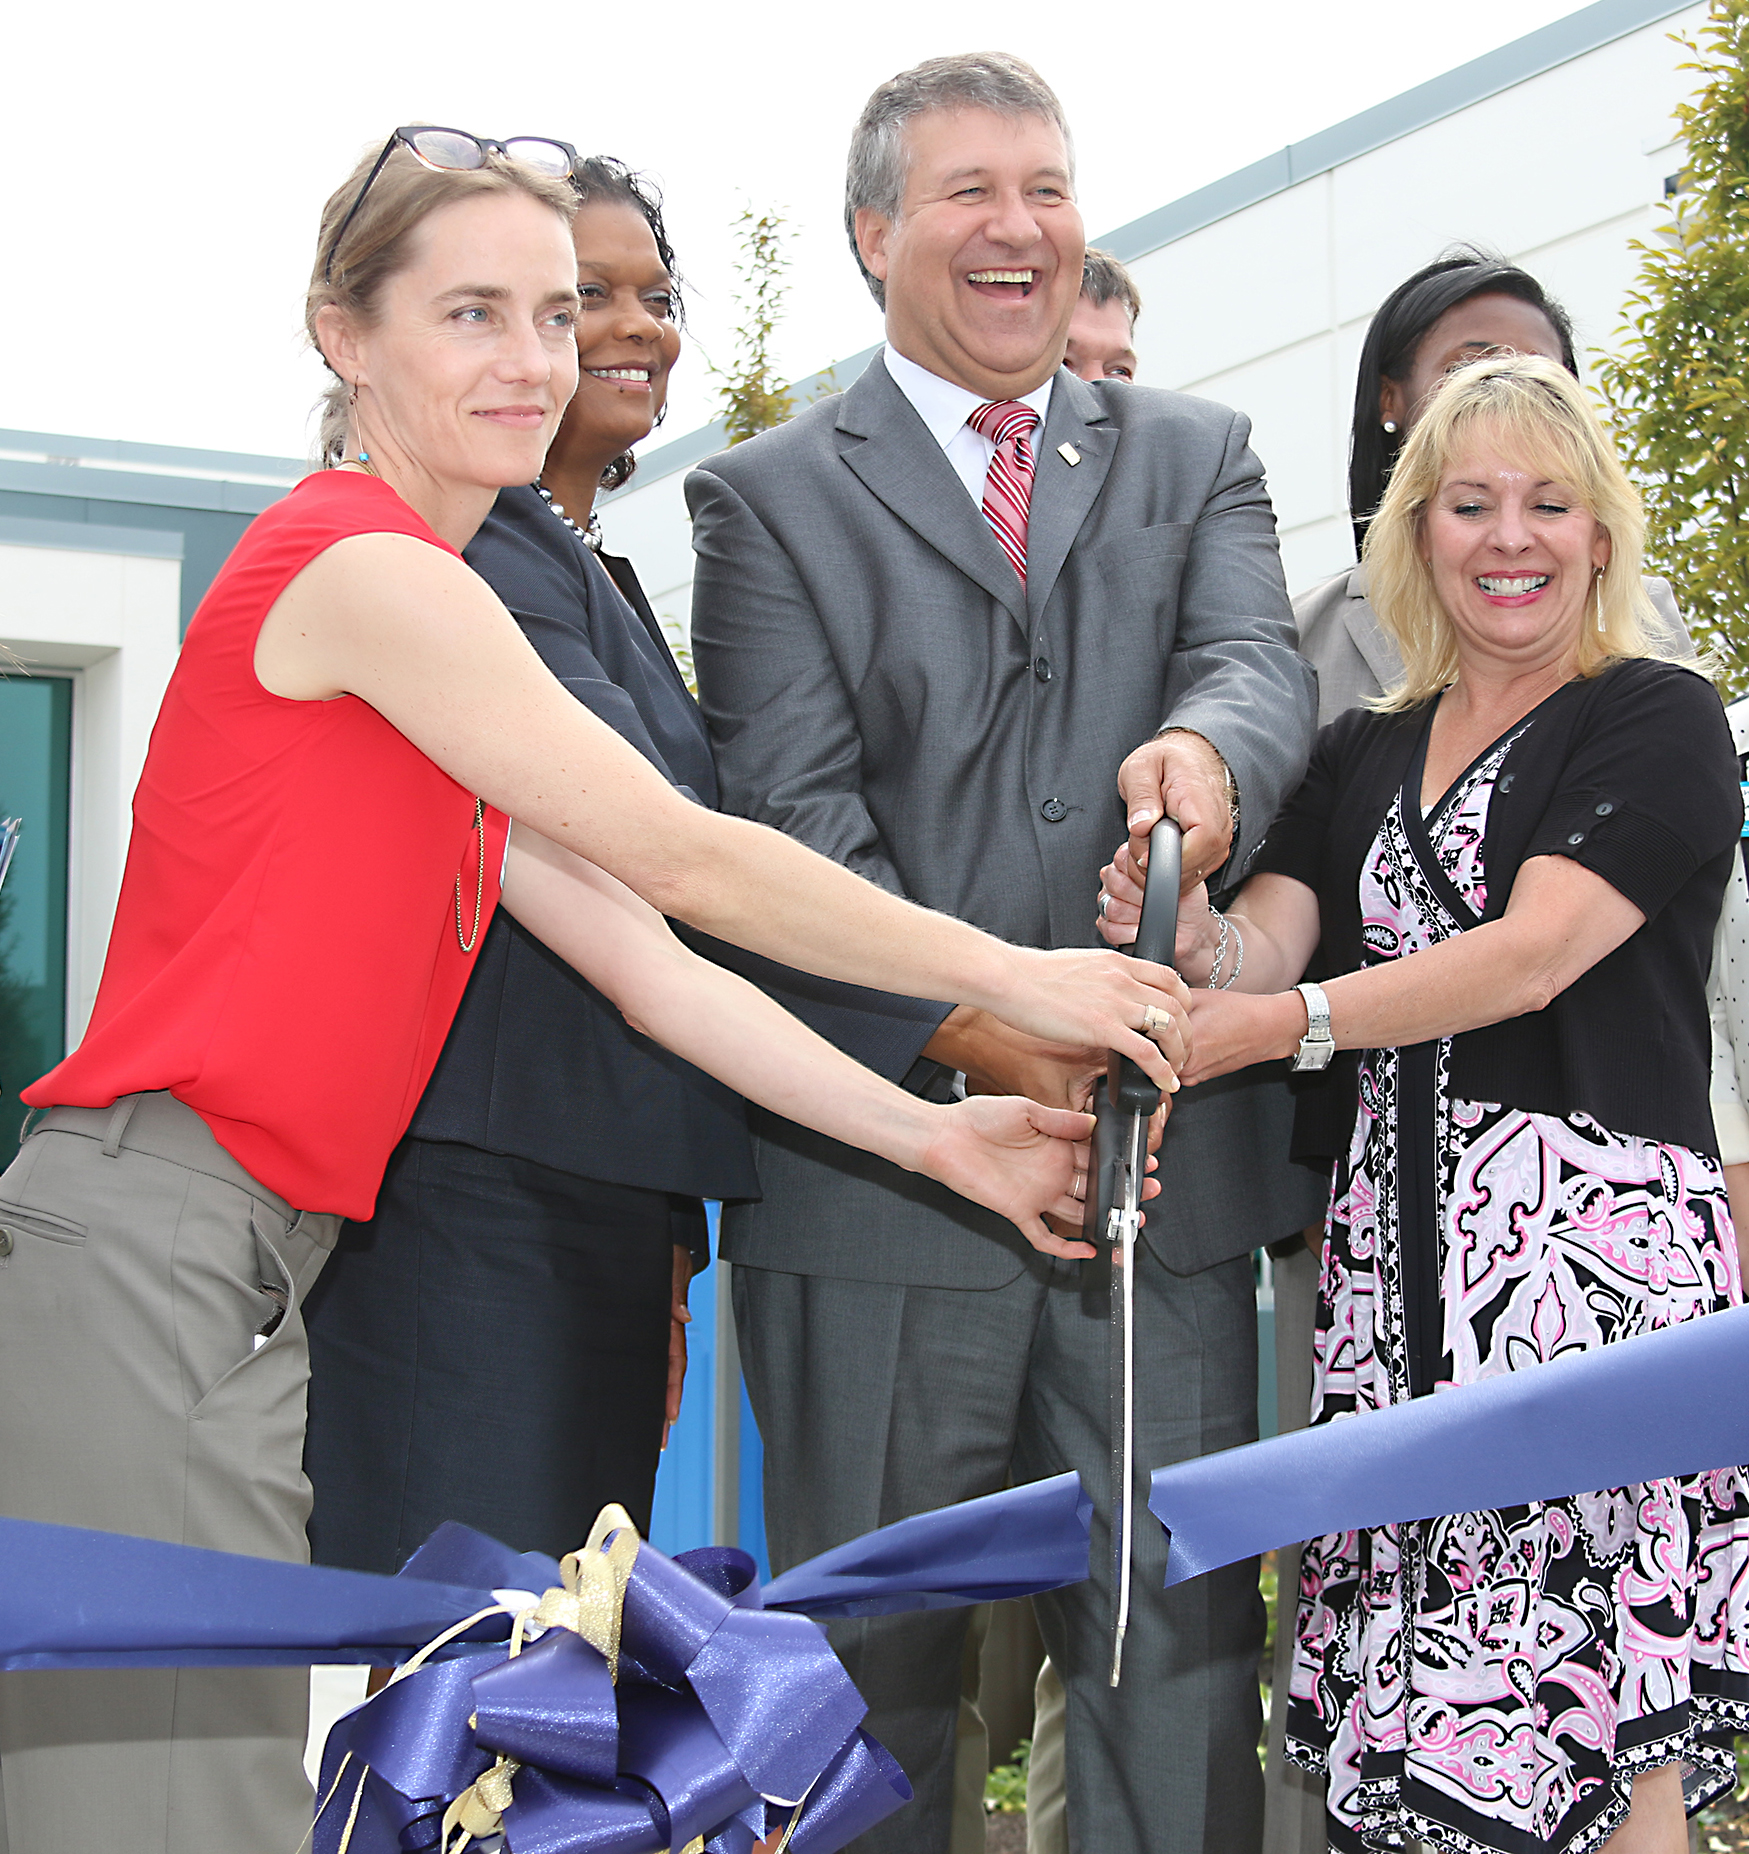 The Swan Island Trades Center ribbon-cutting featured (left to right) Swan Island Business Association Executive Director Sara Angell, Cascade Campus President Karin Edwards, PCC President Jeremy Brown and PCC Board Chair Deanna Palm.